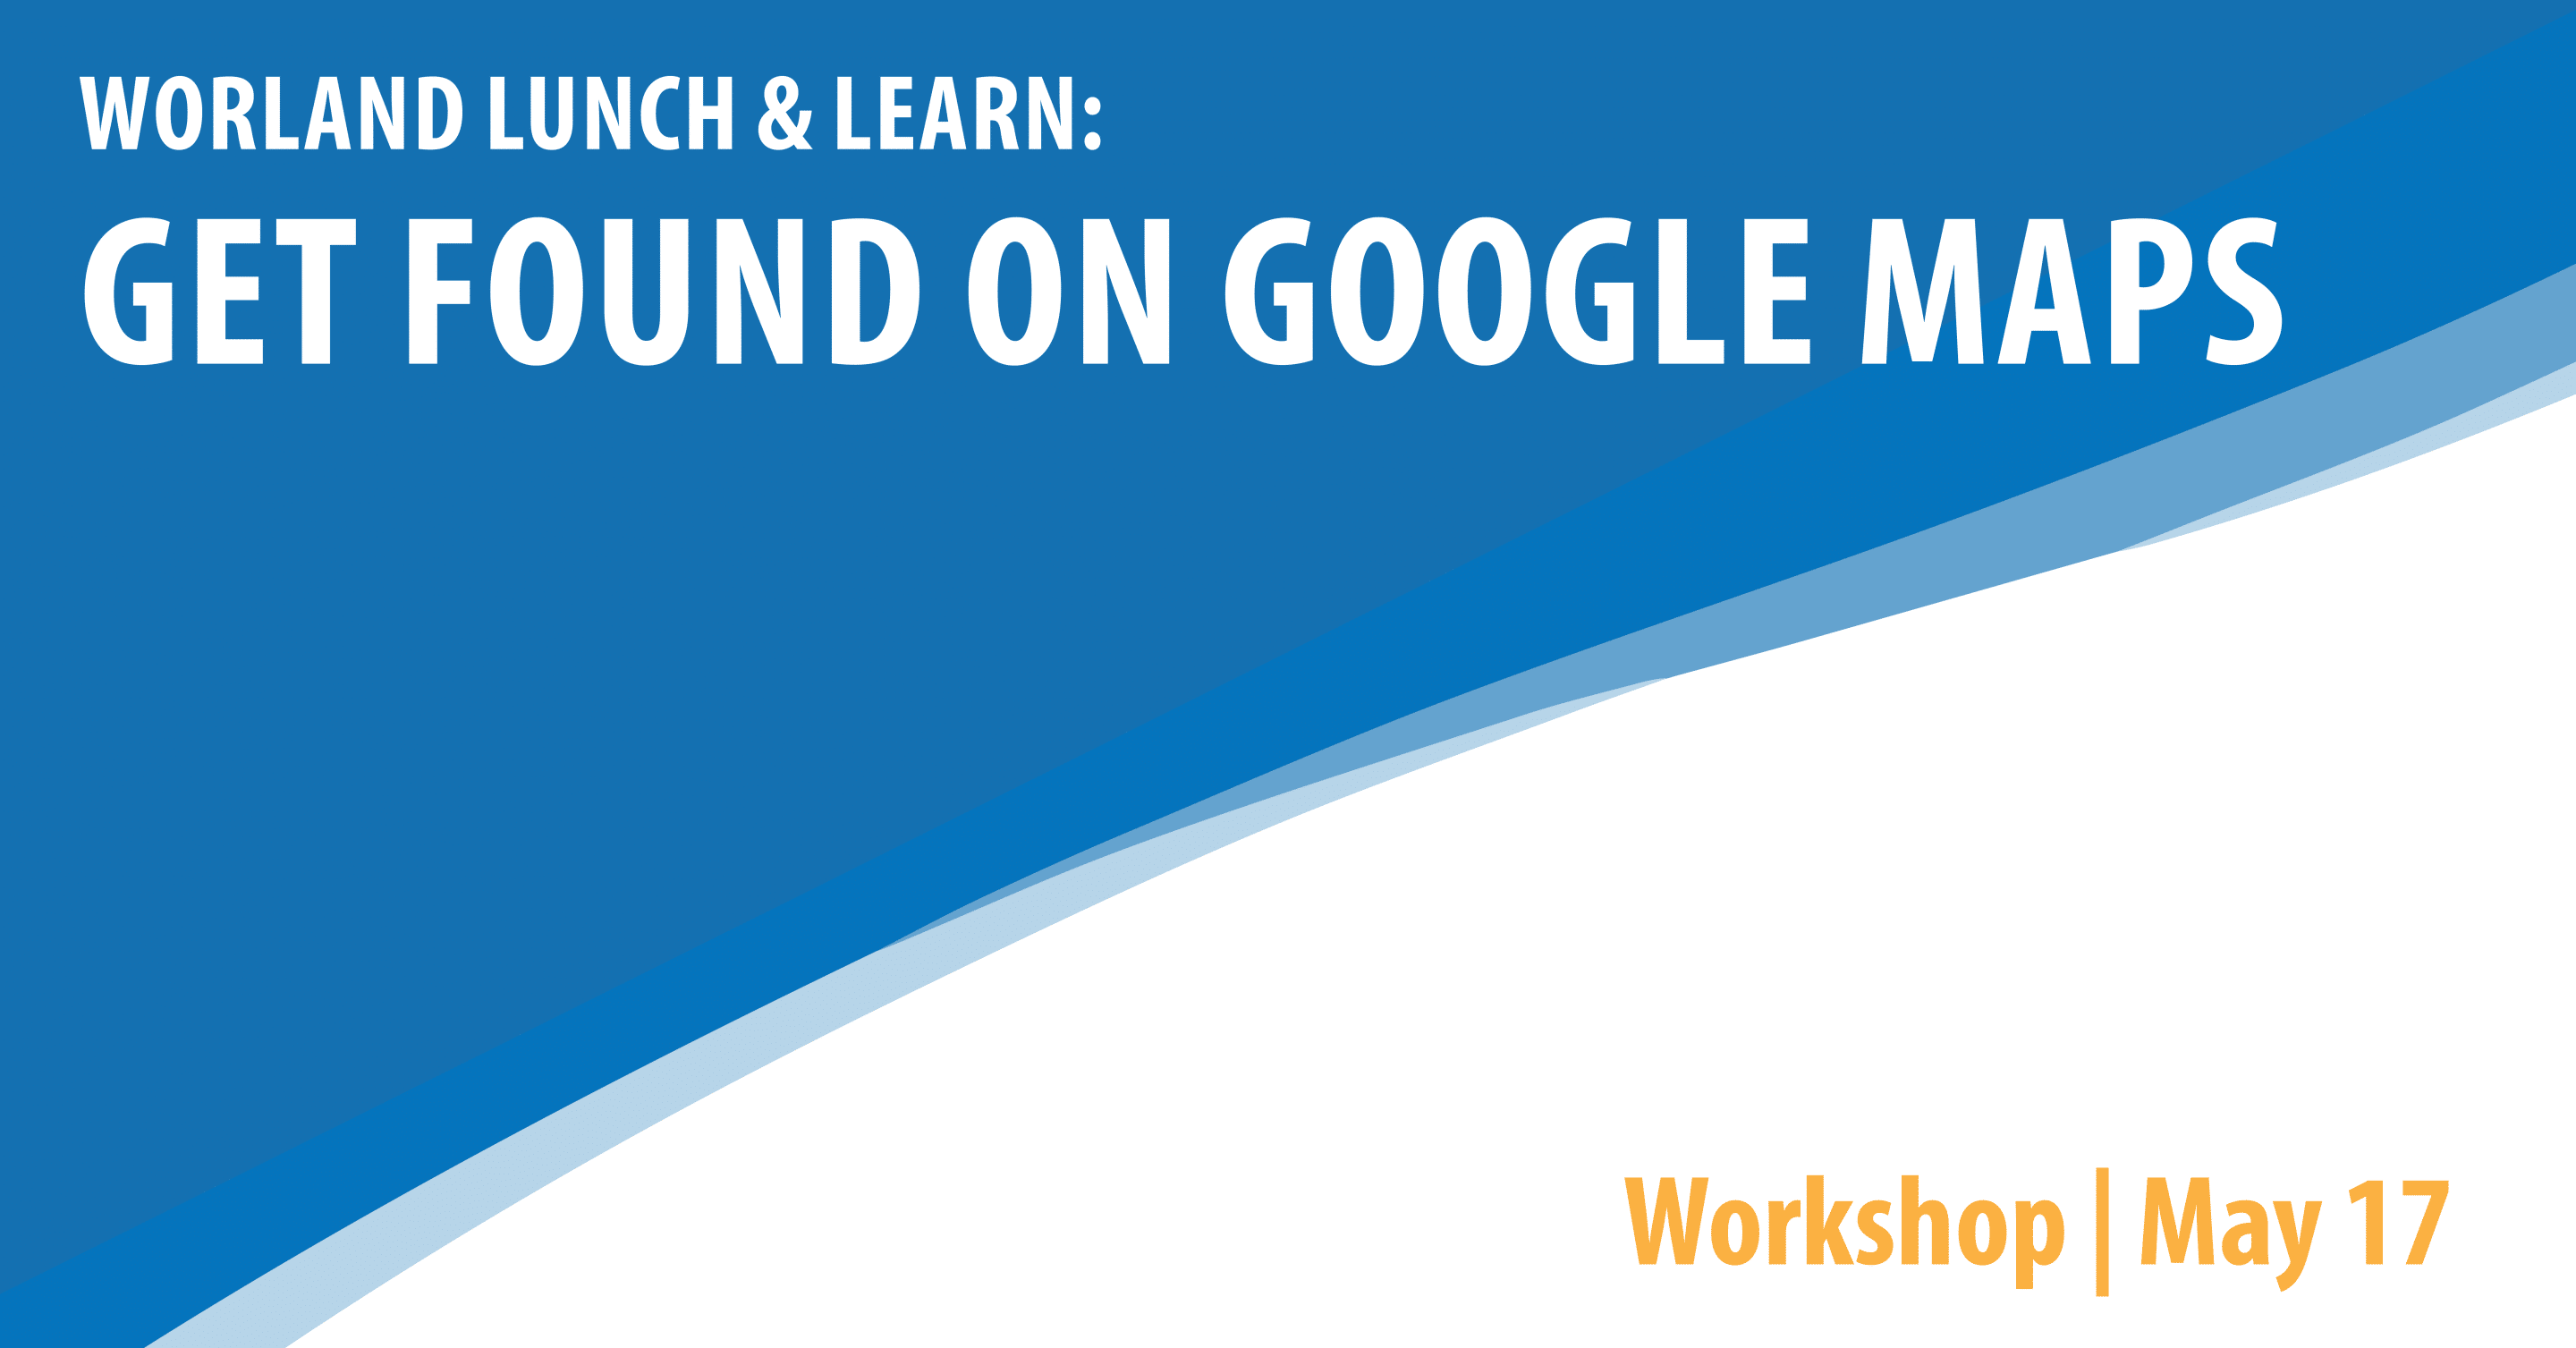 Worland Lunch & Learn: Get Found on Google Maps